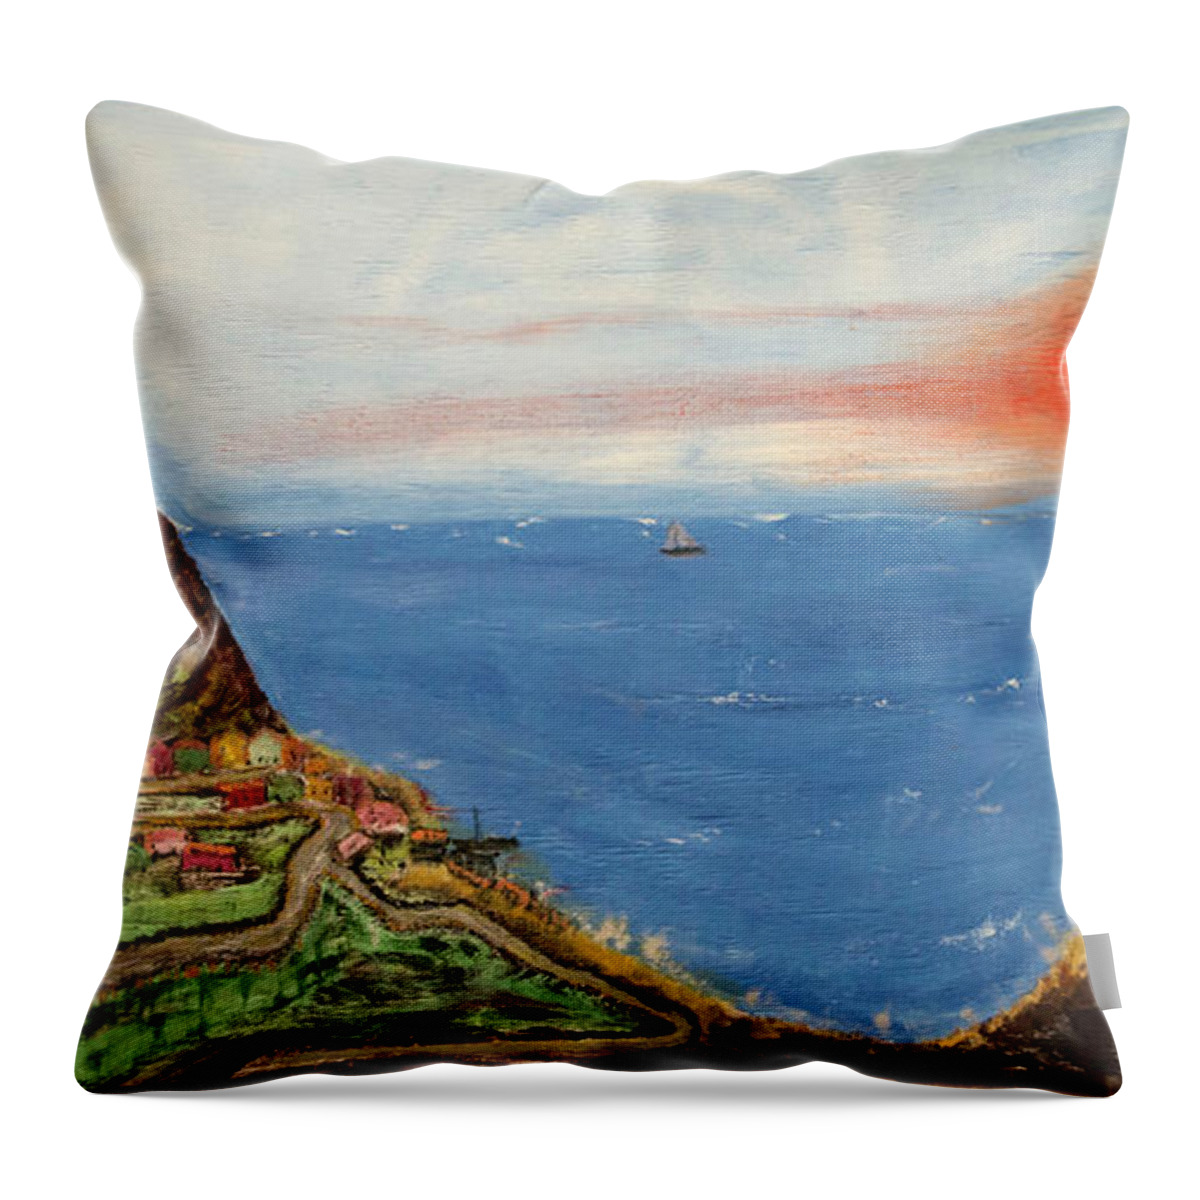  Throw Pillow featuring the painting Santorini by David McCready